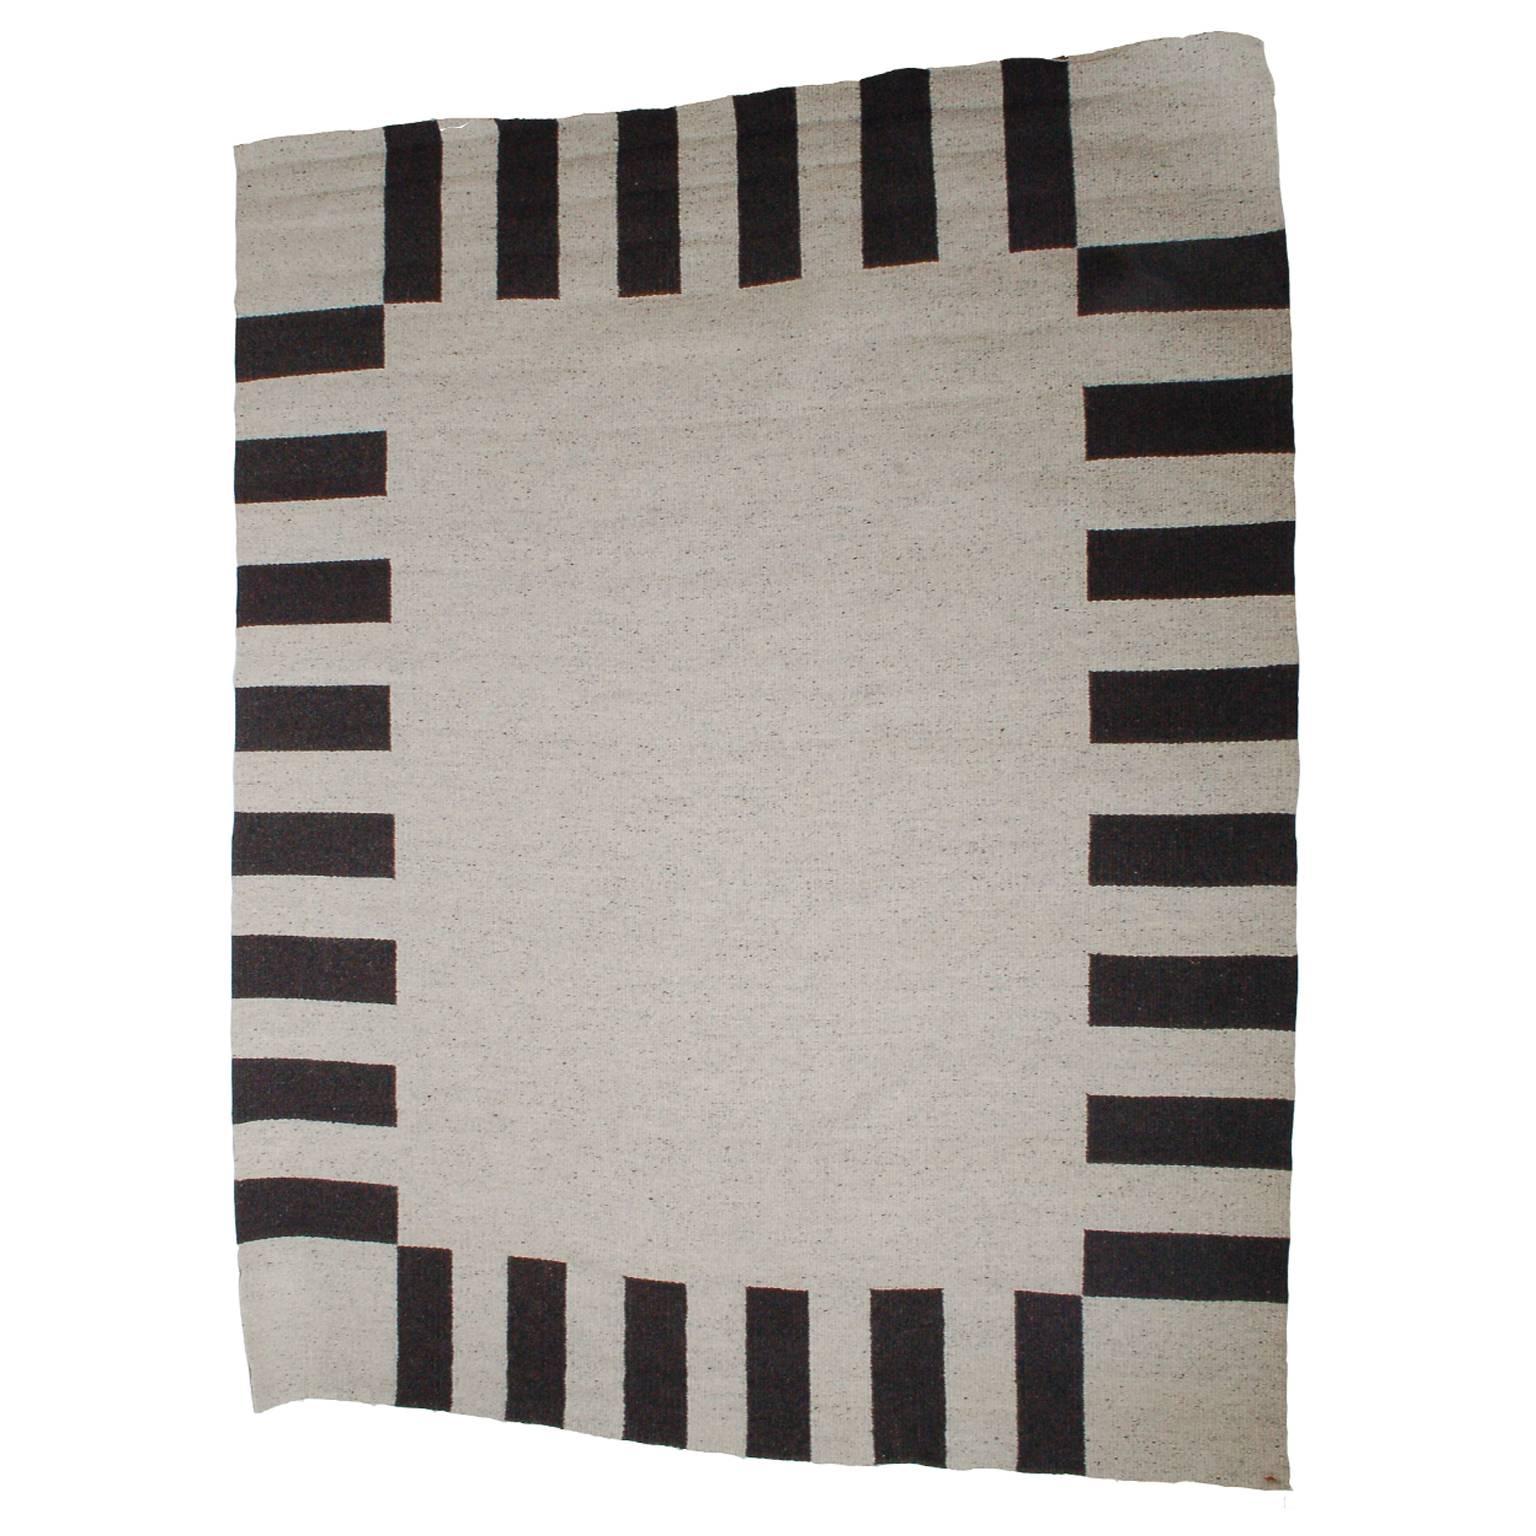 "Clarity of Black and White" Wool and Linen Carpet by Sally Vowell Gurley, 1984